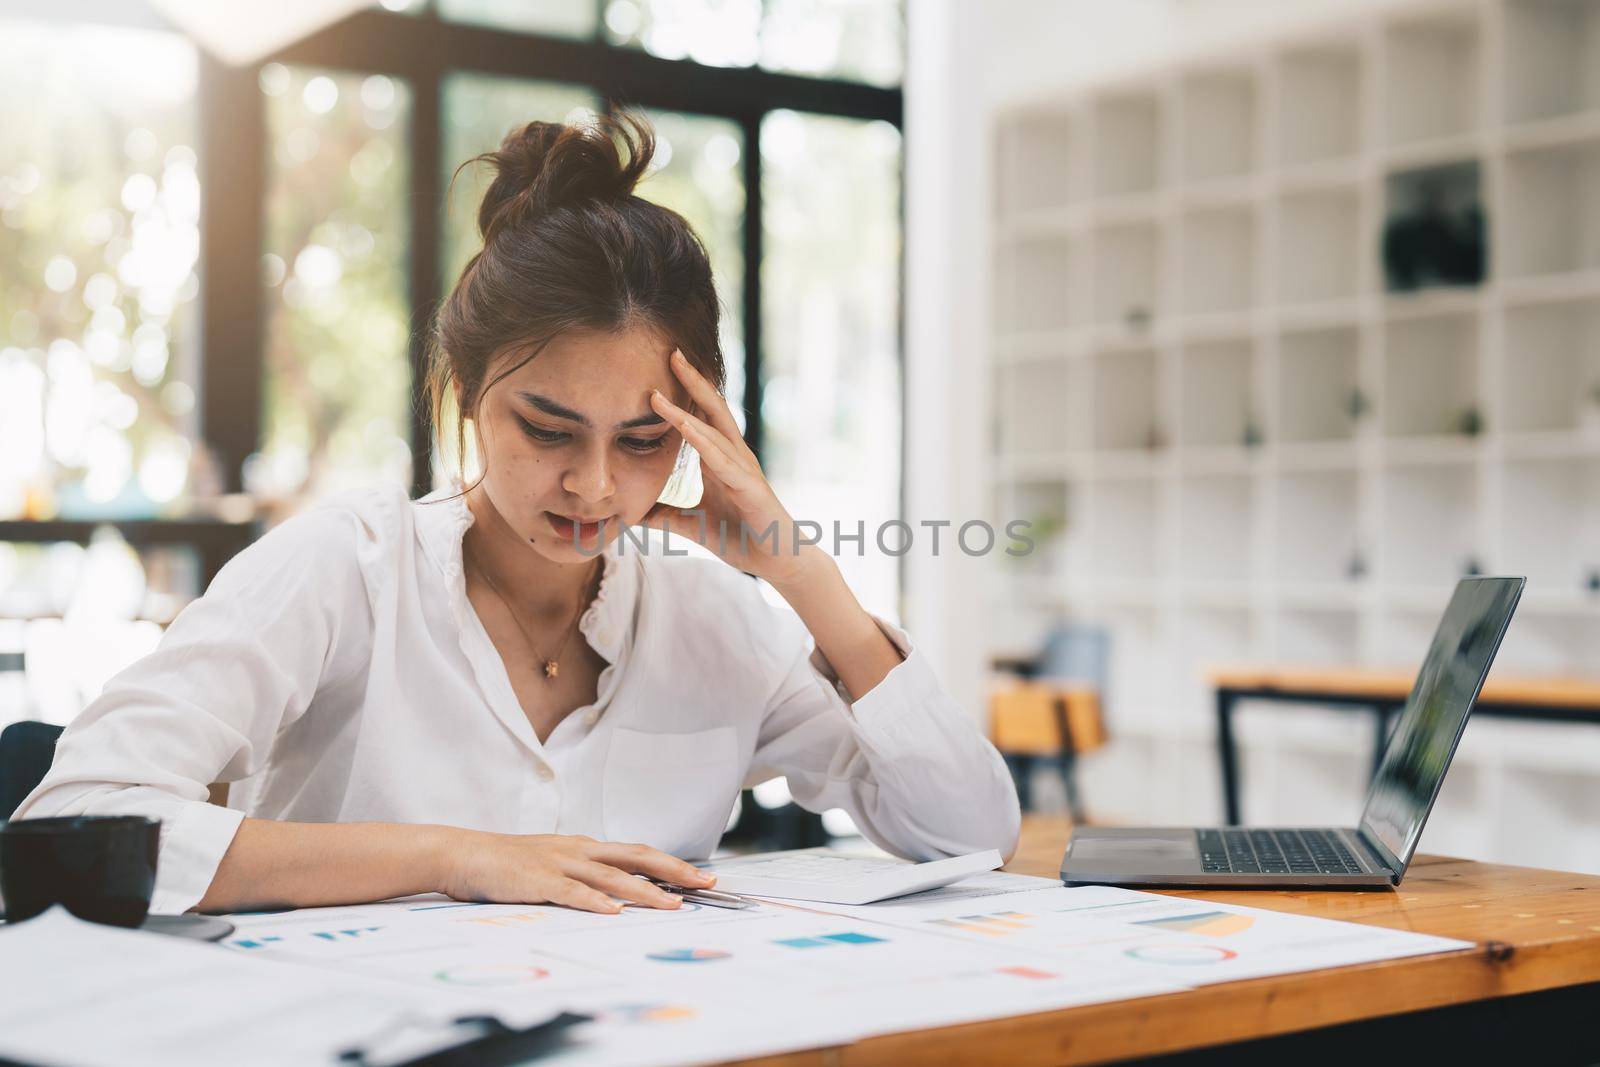 Young asian Woman Office Worker Uses Laptop, Feels Sudden Burst of Pain, Headache, Migraine. Overworked Accountant Feeling Project Pressure, Stress, Massages Her Head, Temples